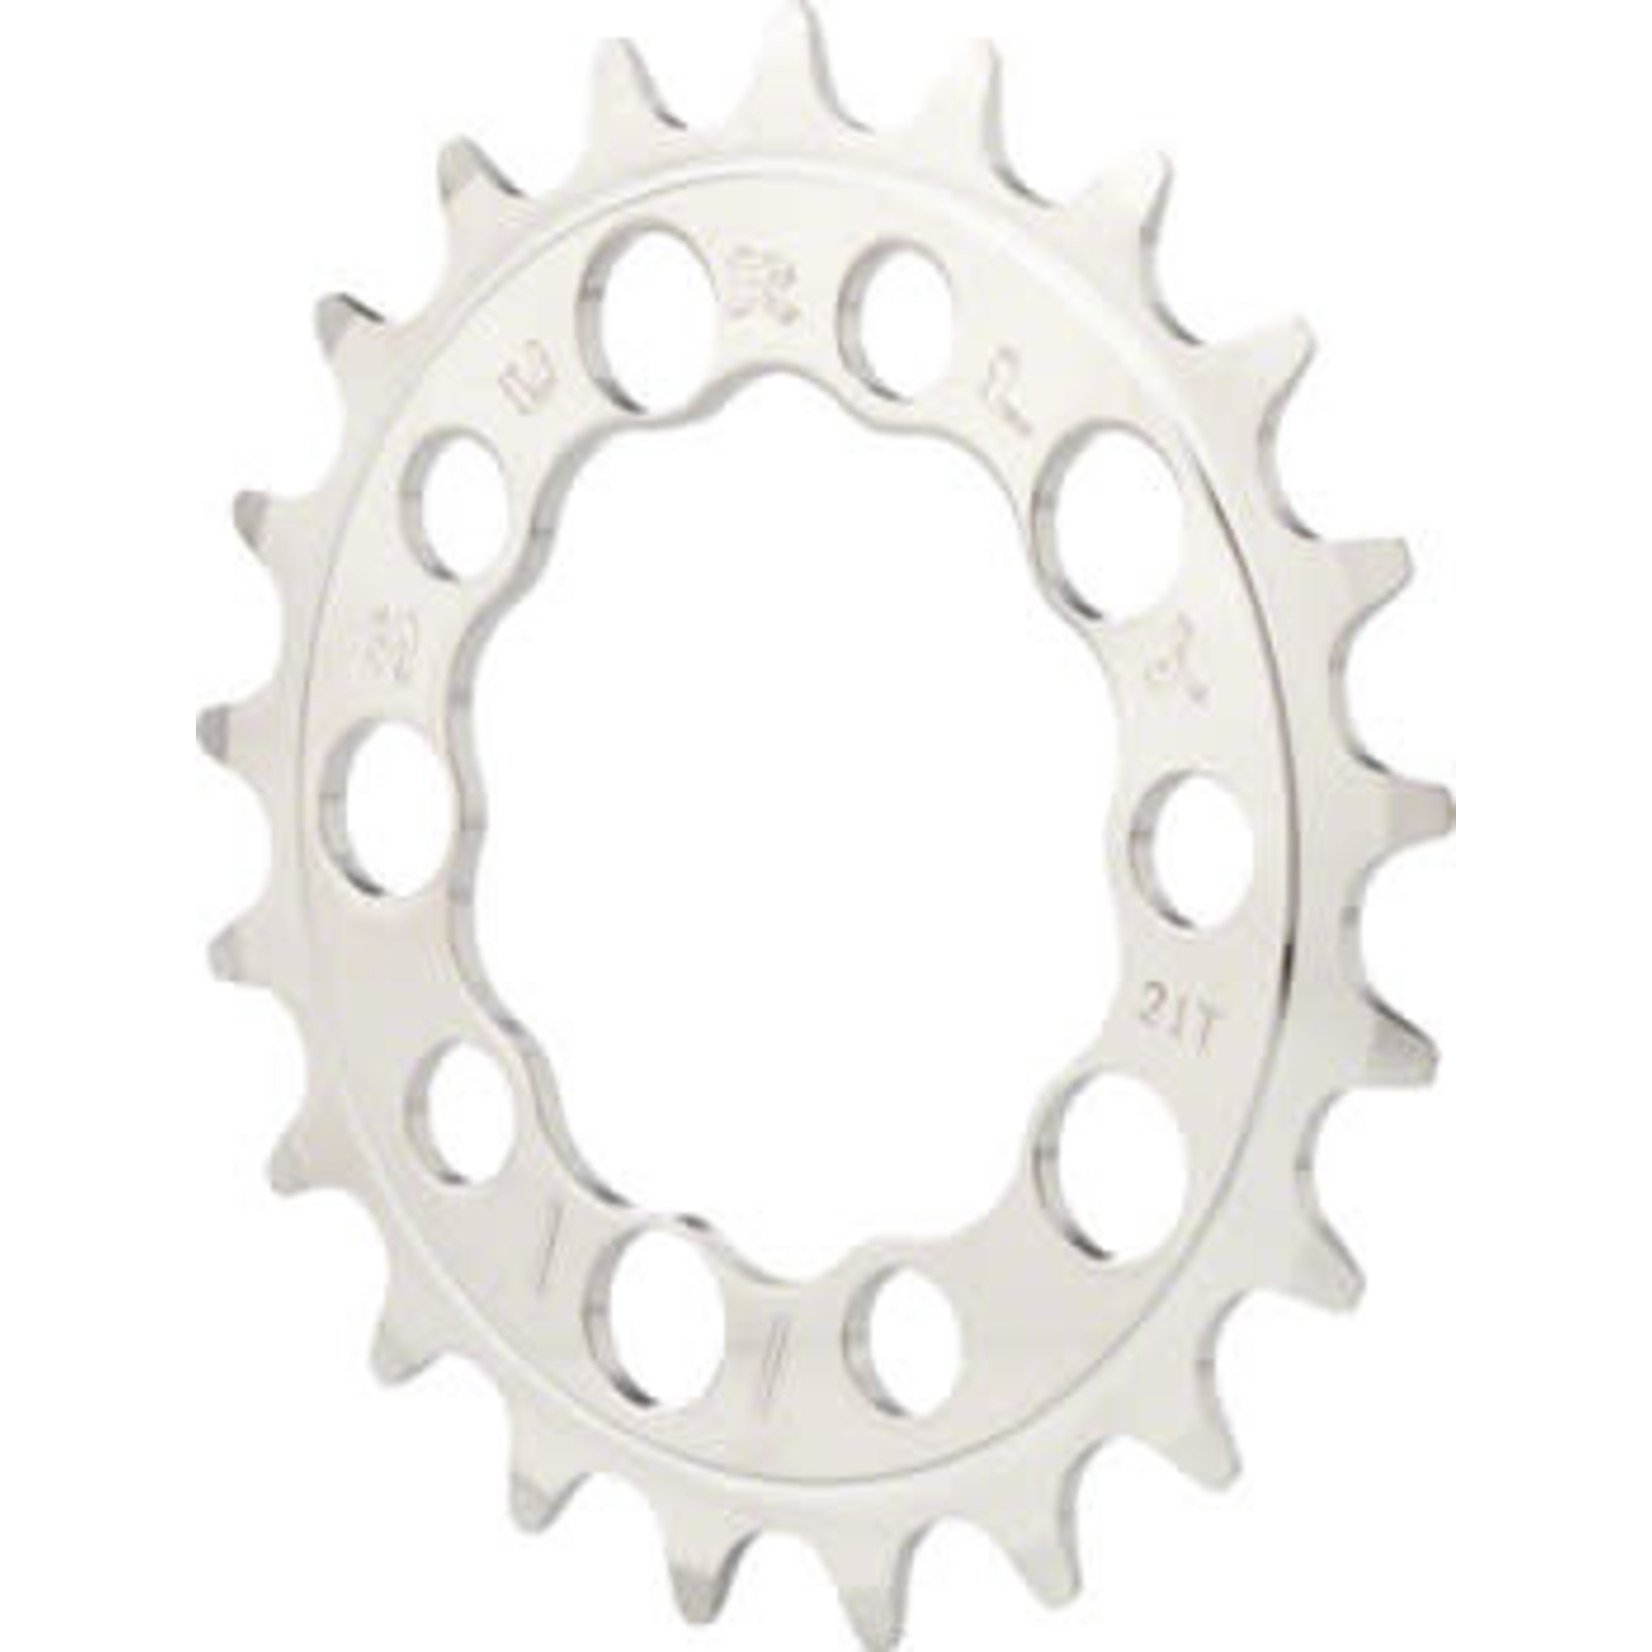 Surly Surly Stainless Steel Chainring 21t x 58mm MWOD Inner